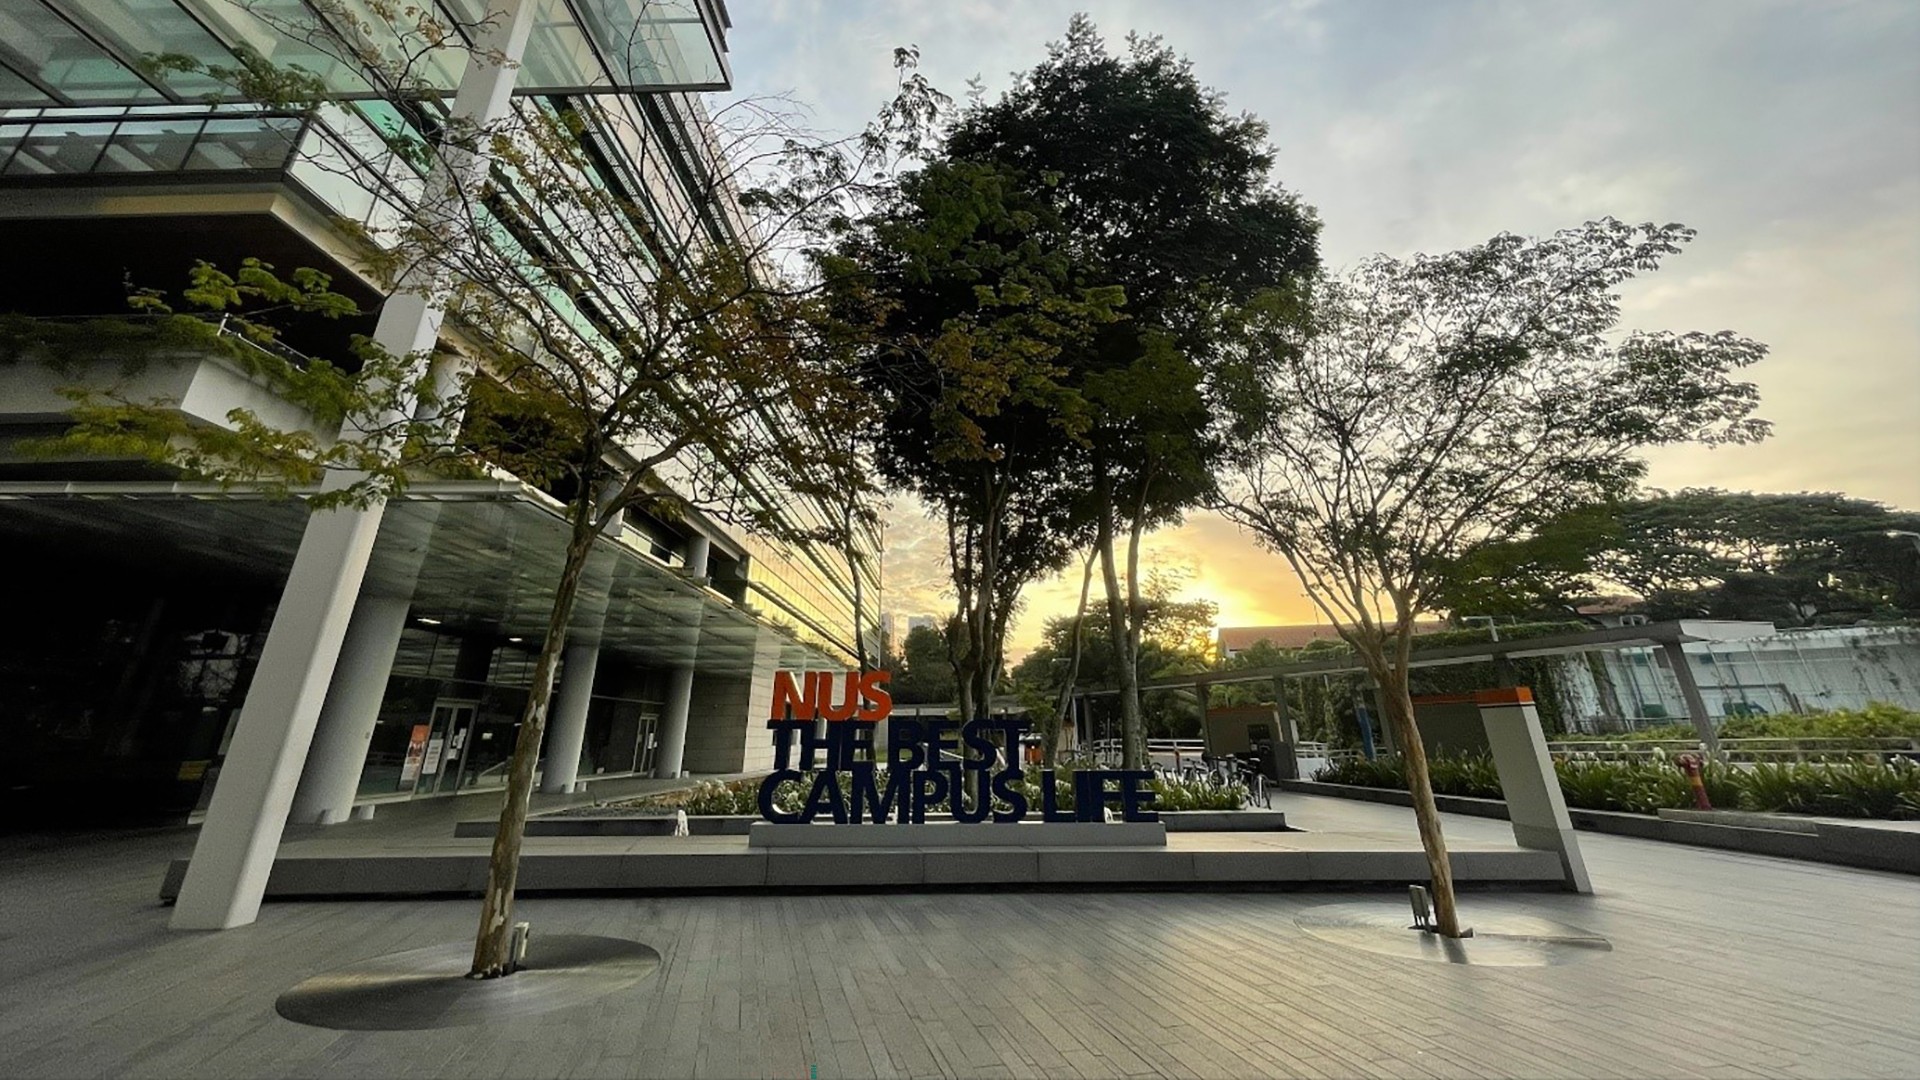 Looking to 2022: Transforming NUS hostels for graduates of the future